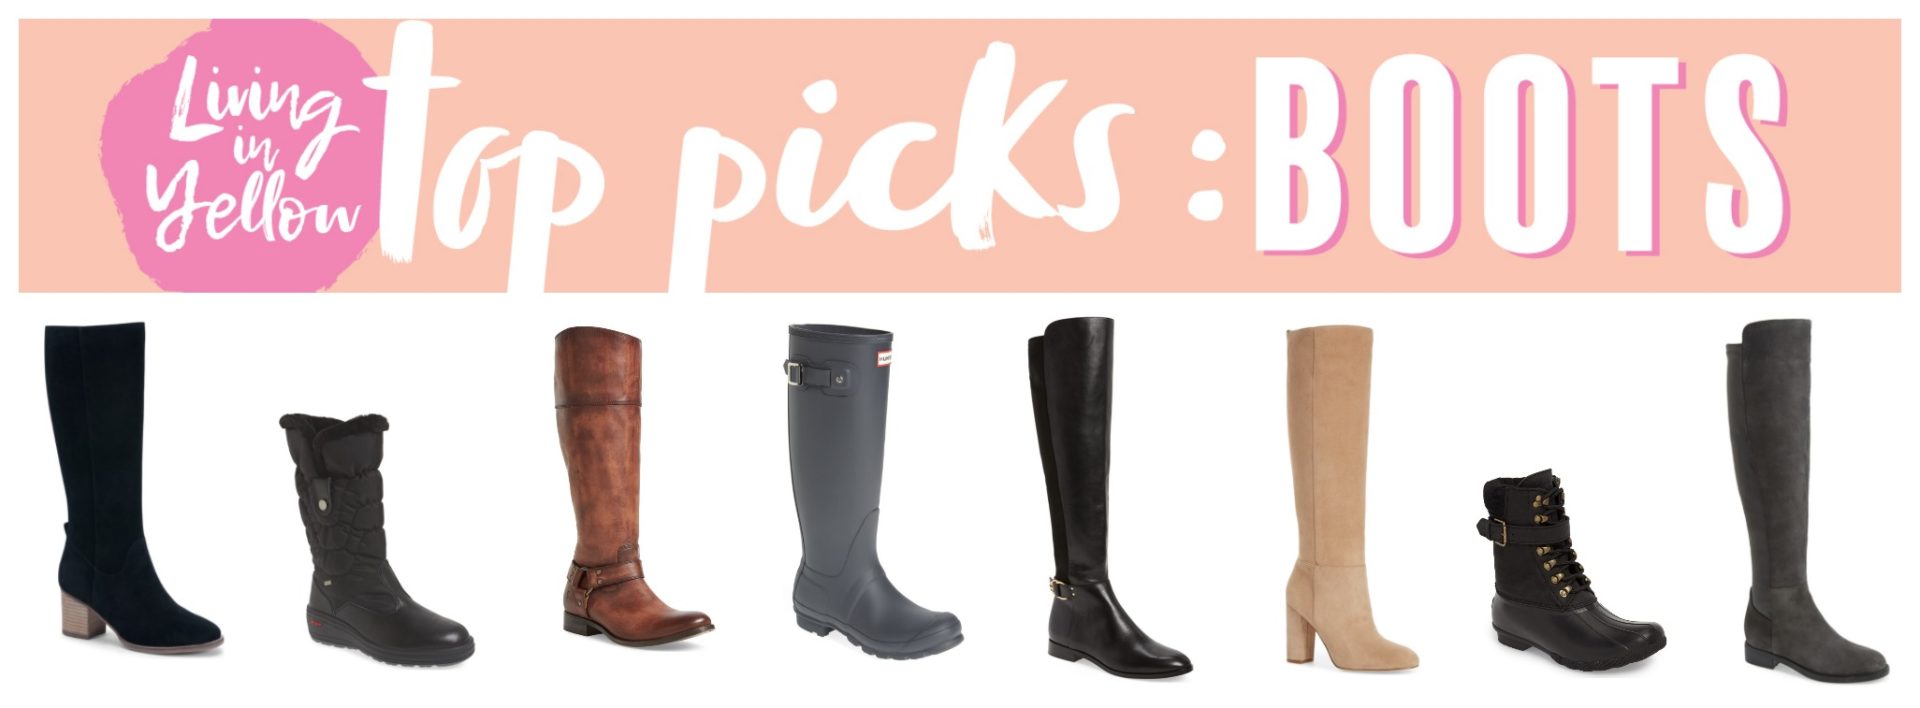 nordstrom anniversary sale boots